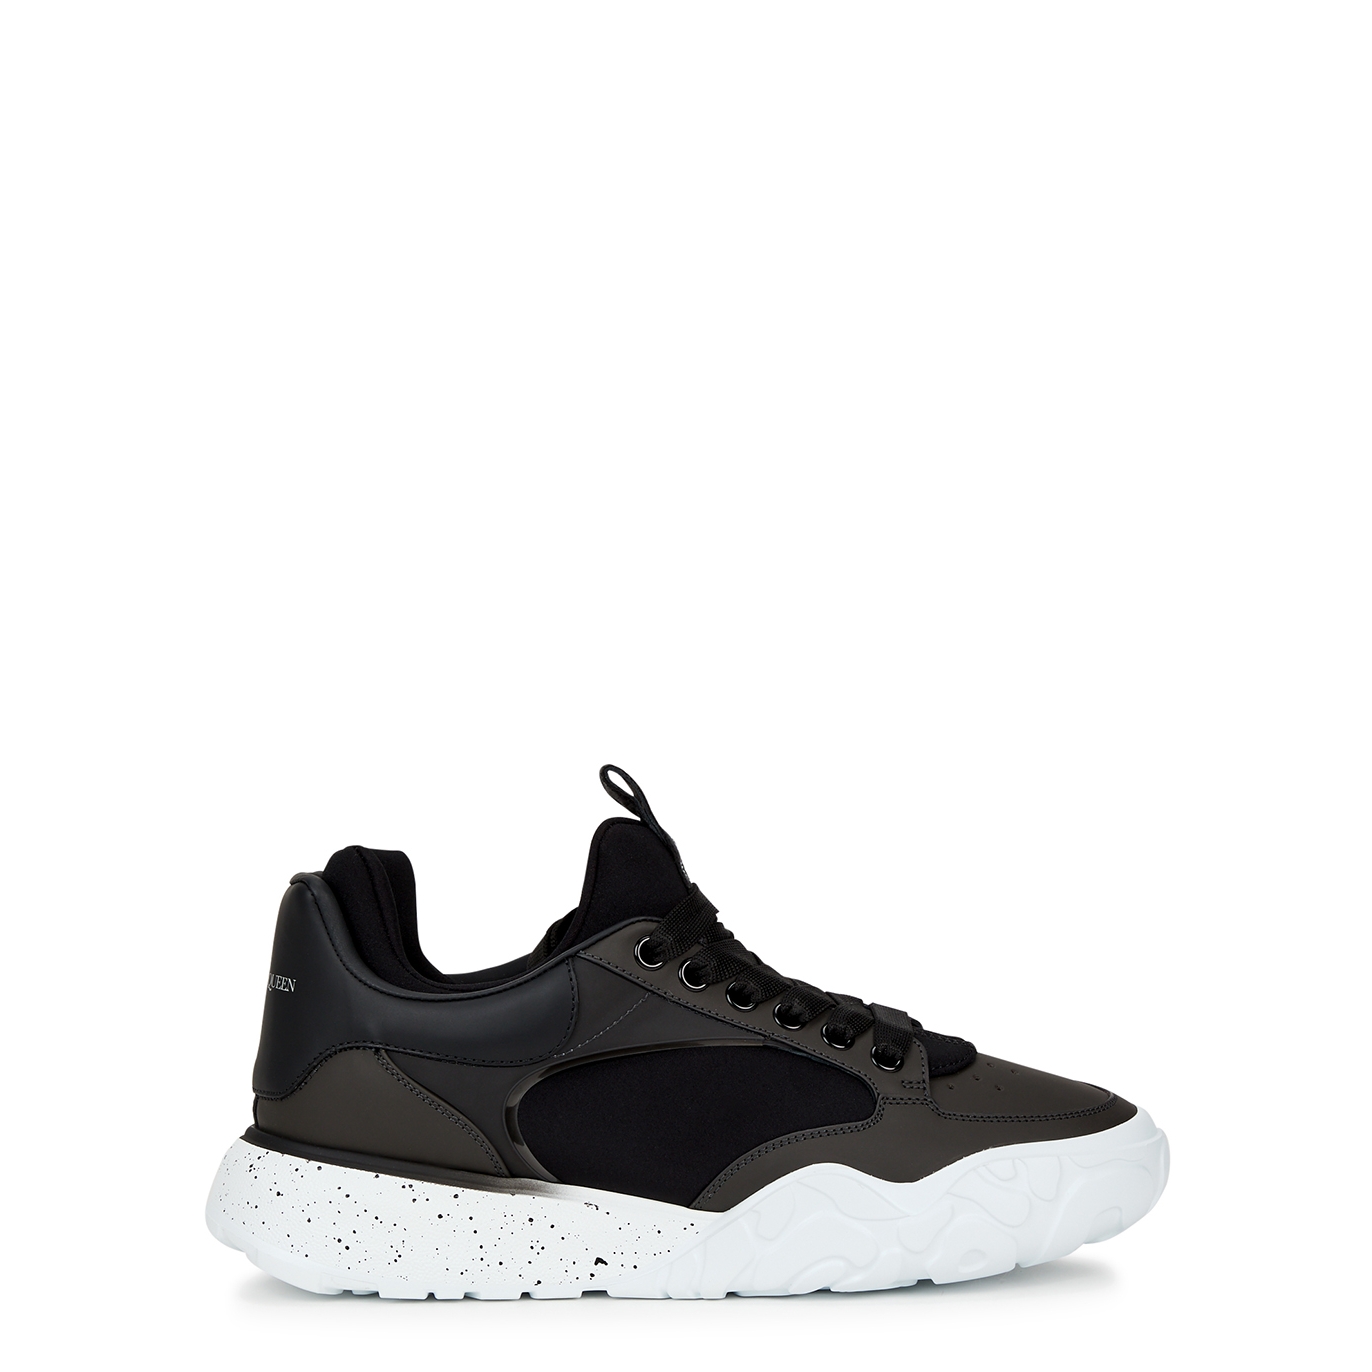 Alexander McQueen Court Panelled Neoprene Sneakers - Black And White - 7